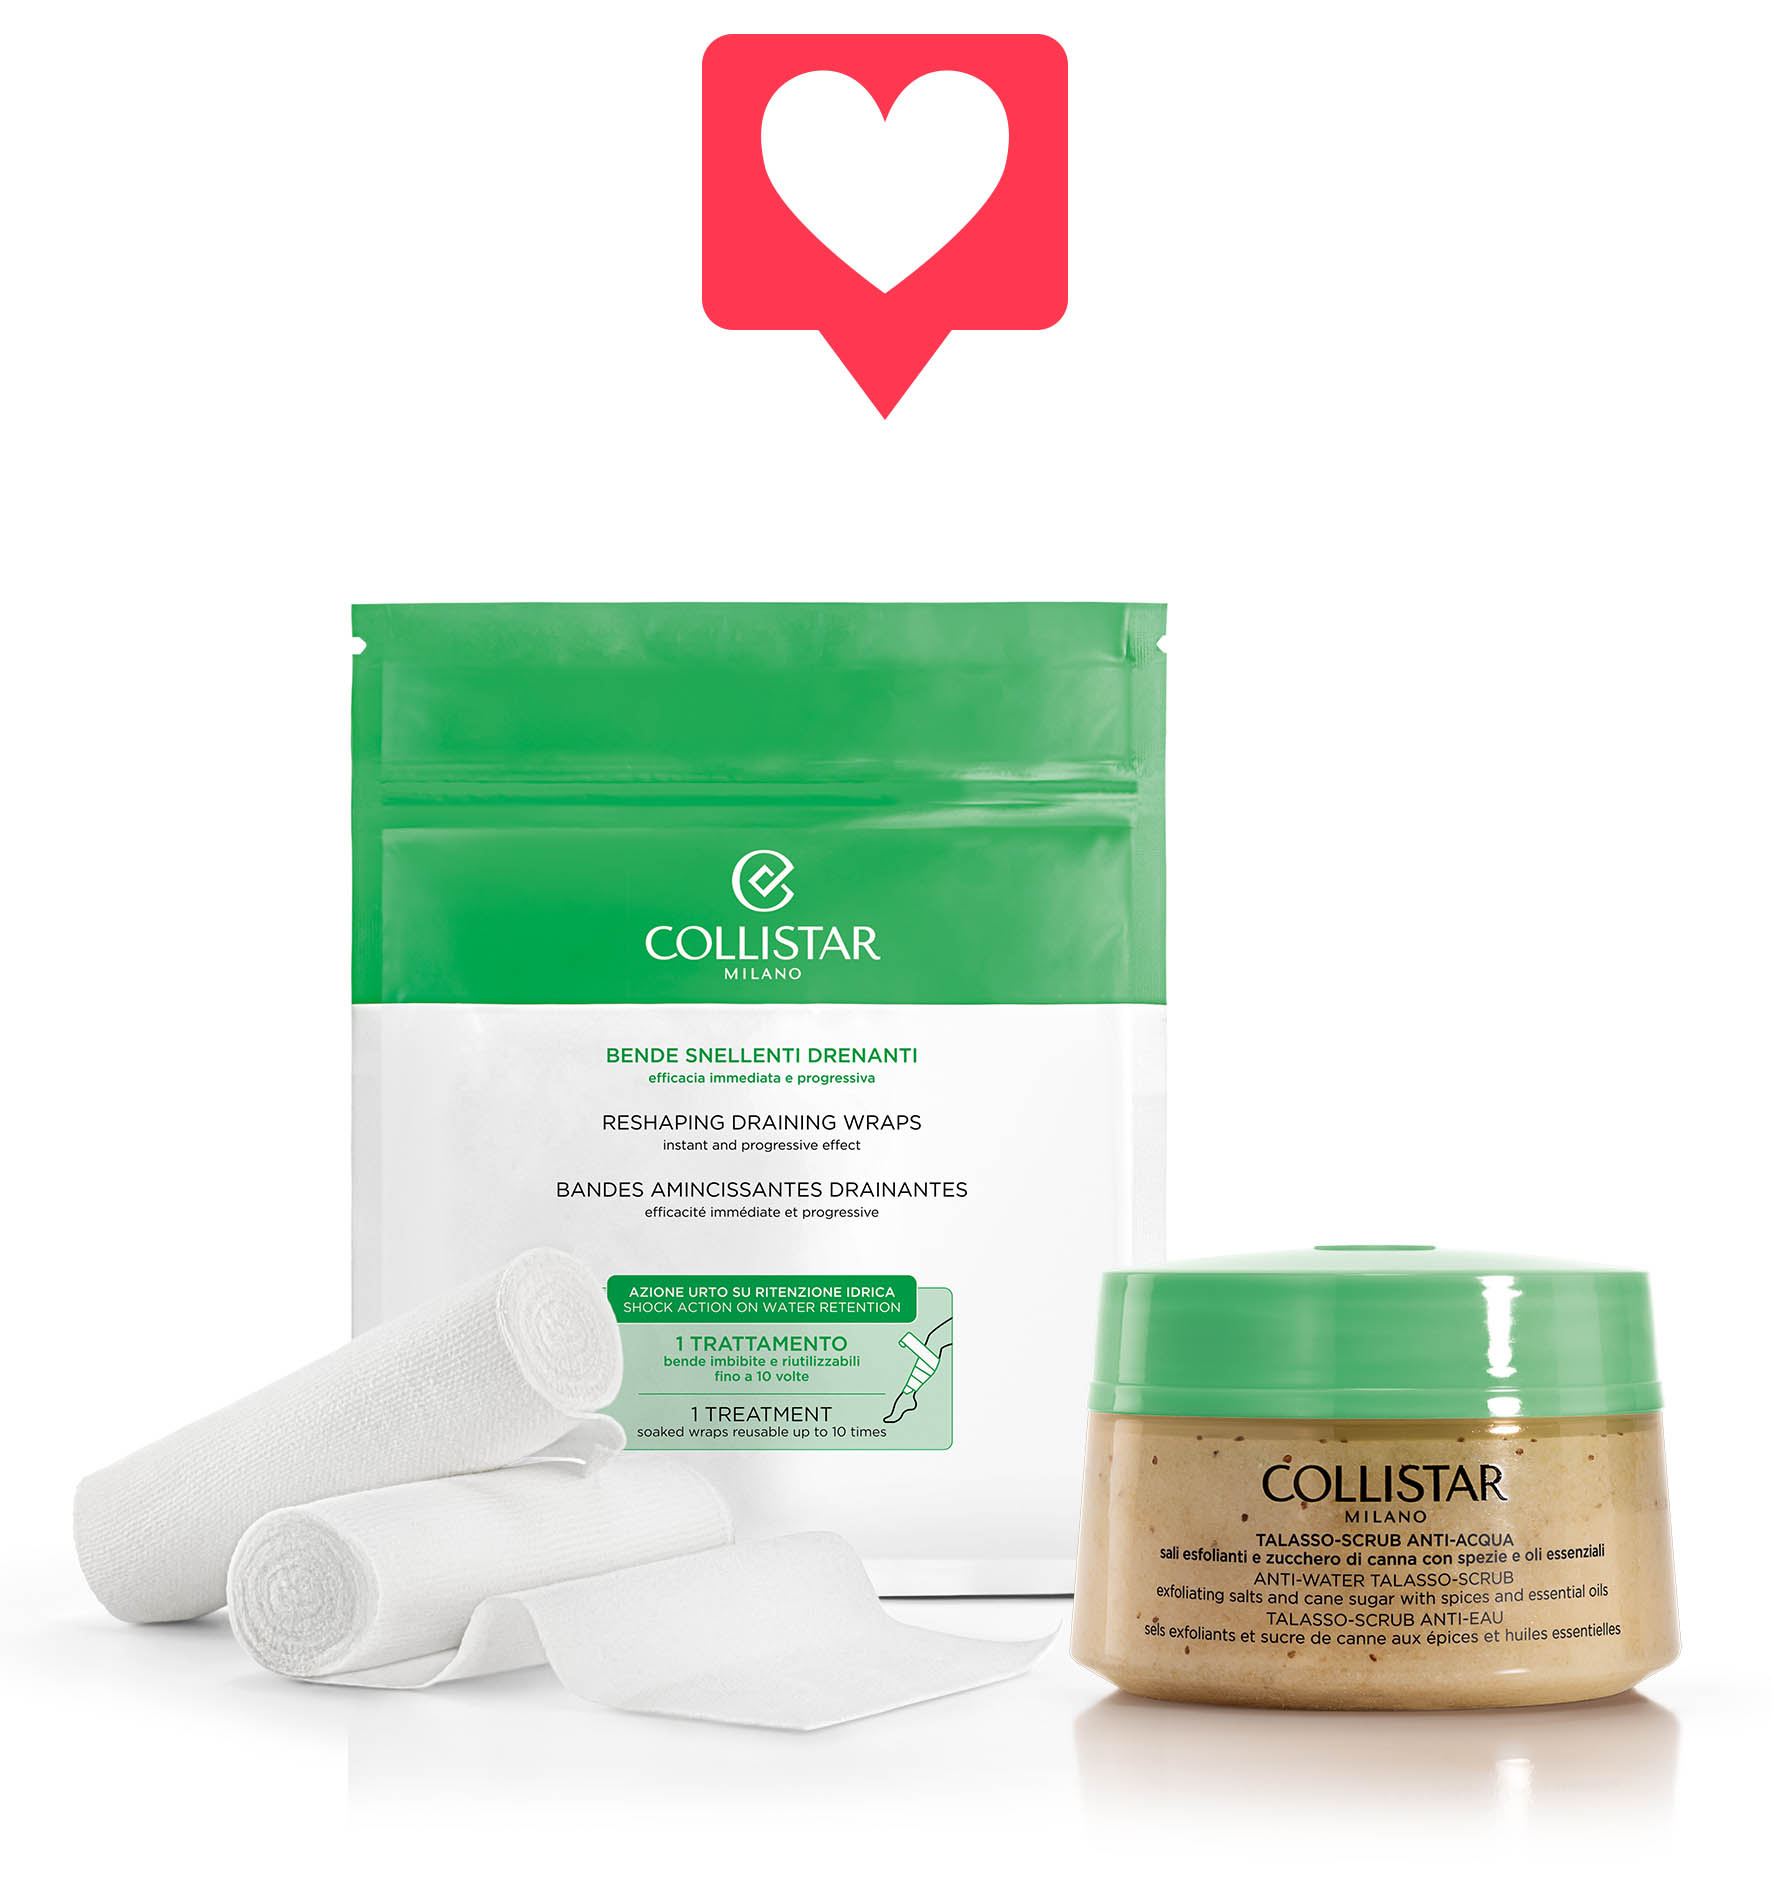 RESHAPING DRAINING WRAPS + ANTI-WATER TALASSO-SCRUB 300g - VALENTINE’S DAY | Collistar - Shop Online Ufficiale